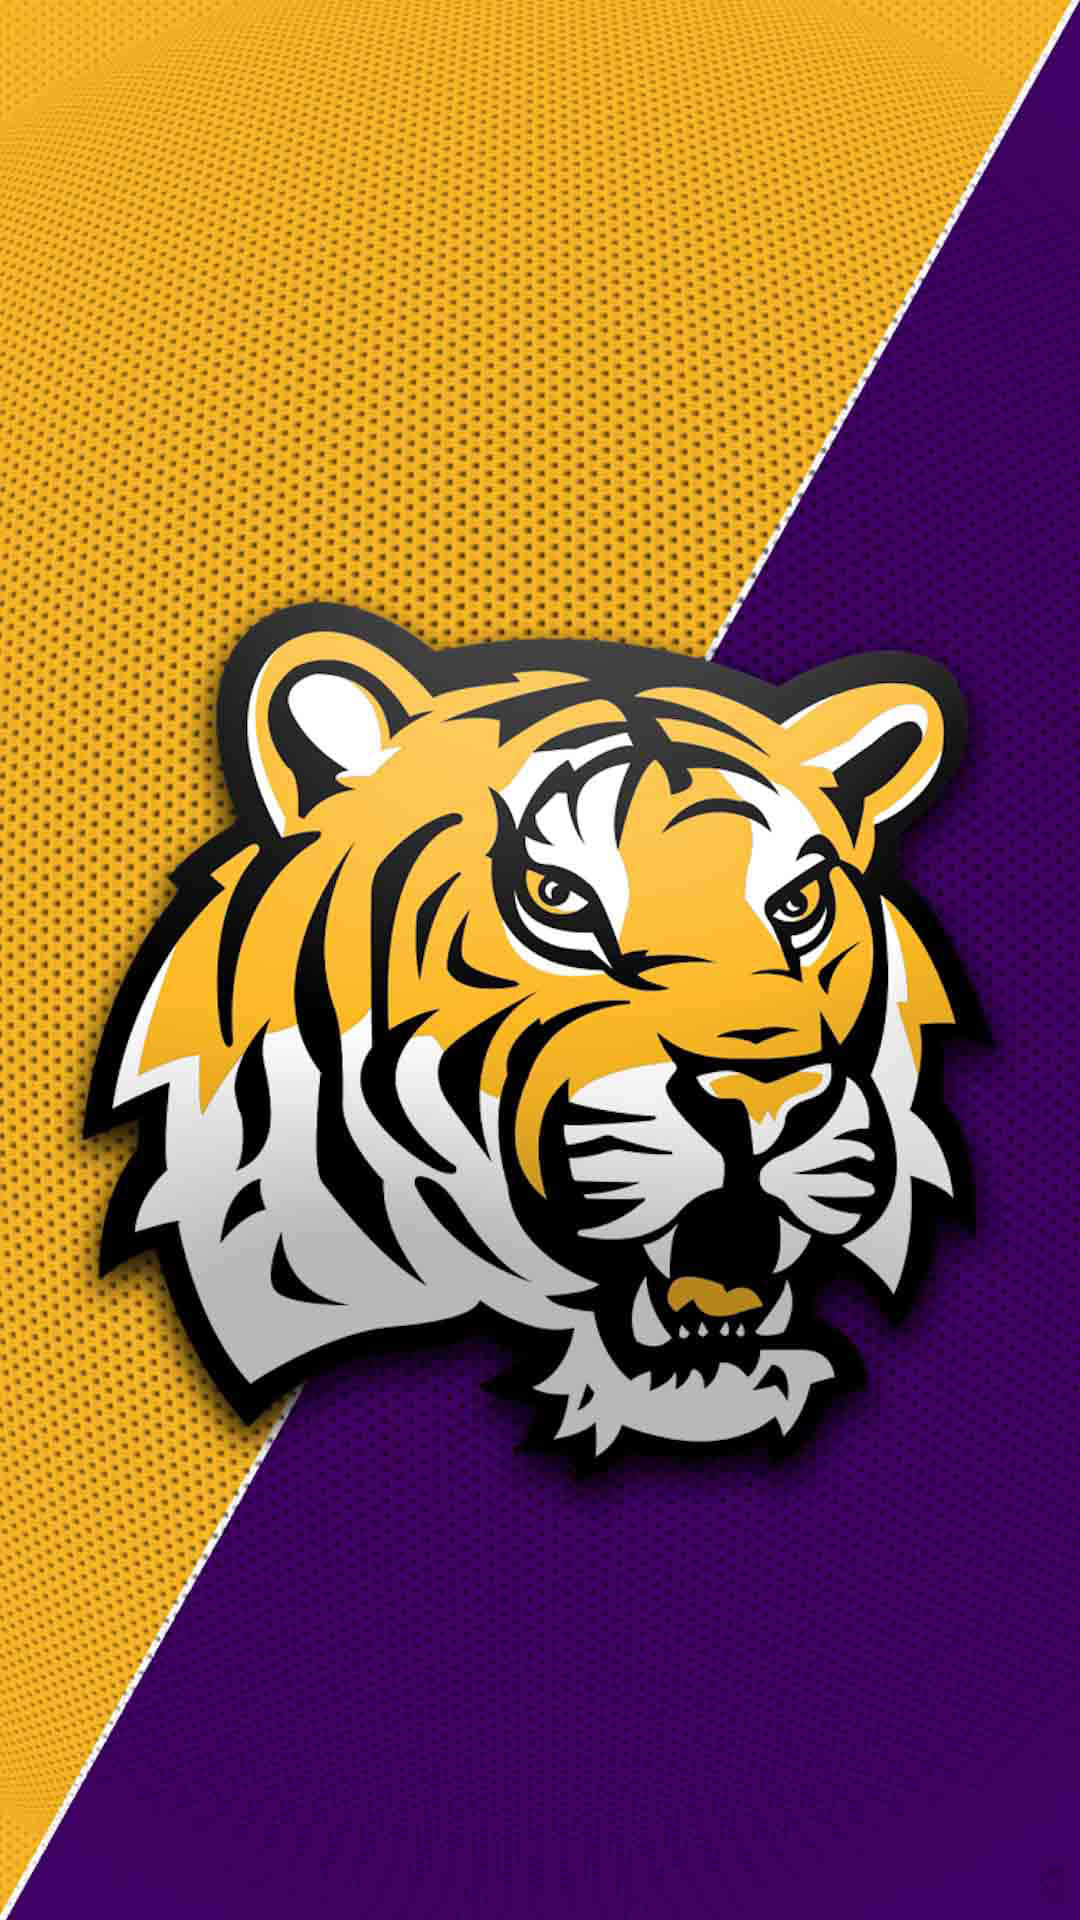 The LSU Tigers Roar Victory over Their Opponents Wallpaper